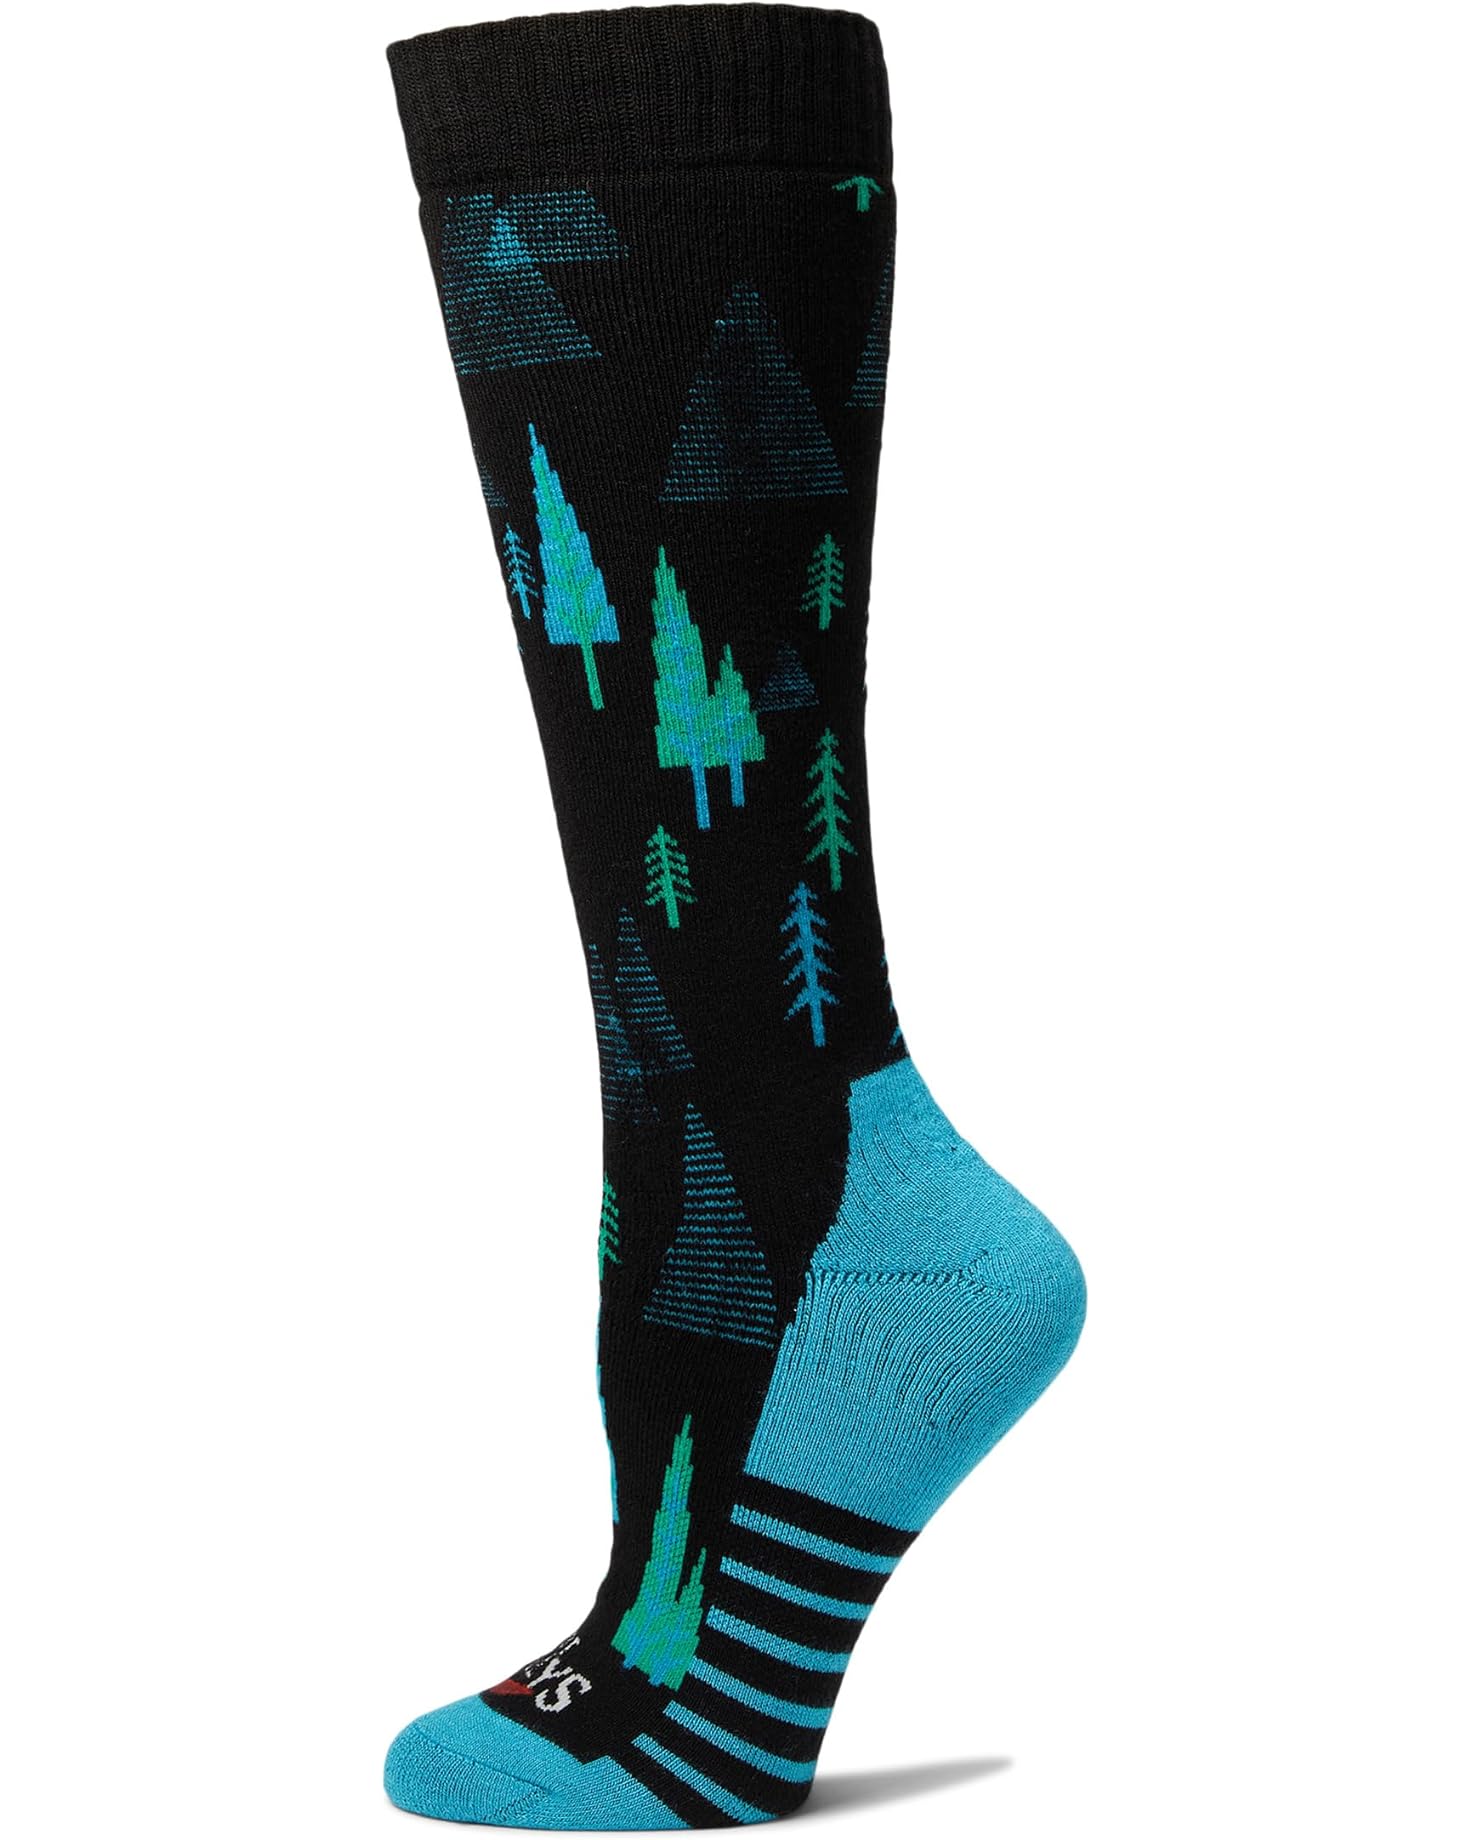 Hot Chillys Mid Volume Sock - Women's Balck with Blue and Green trees